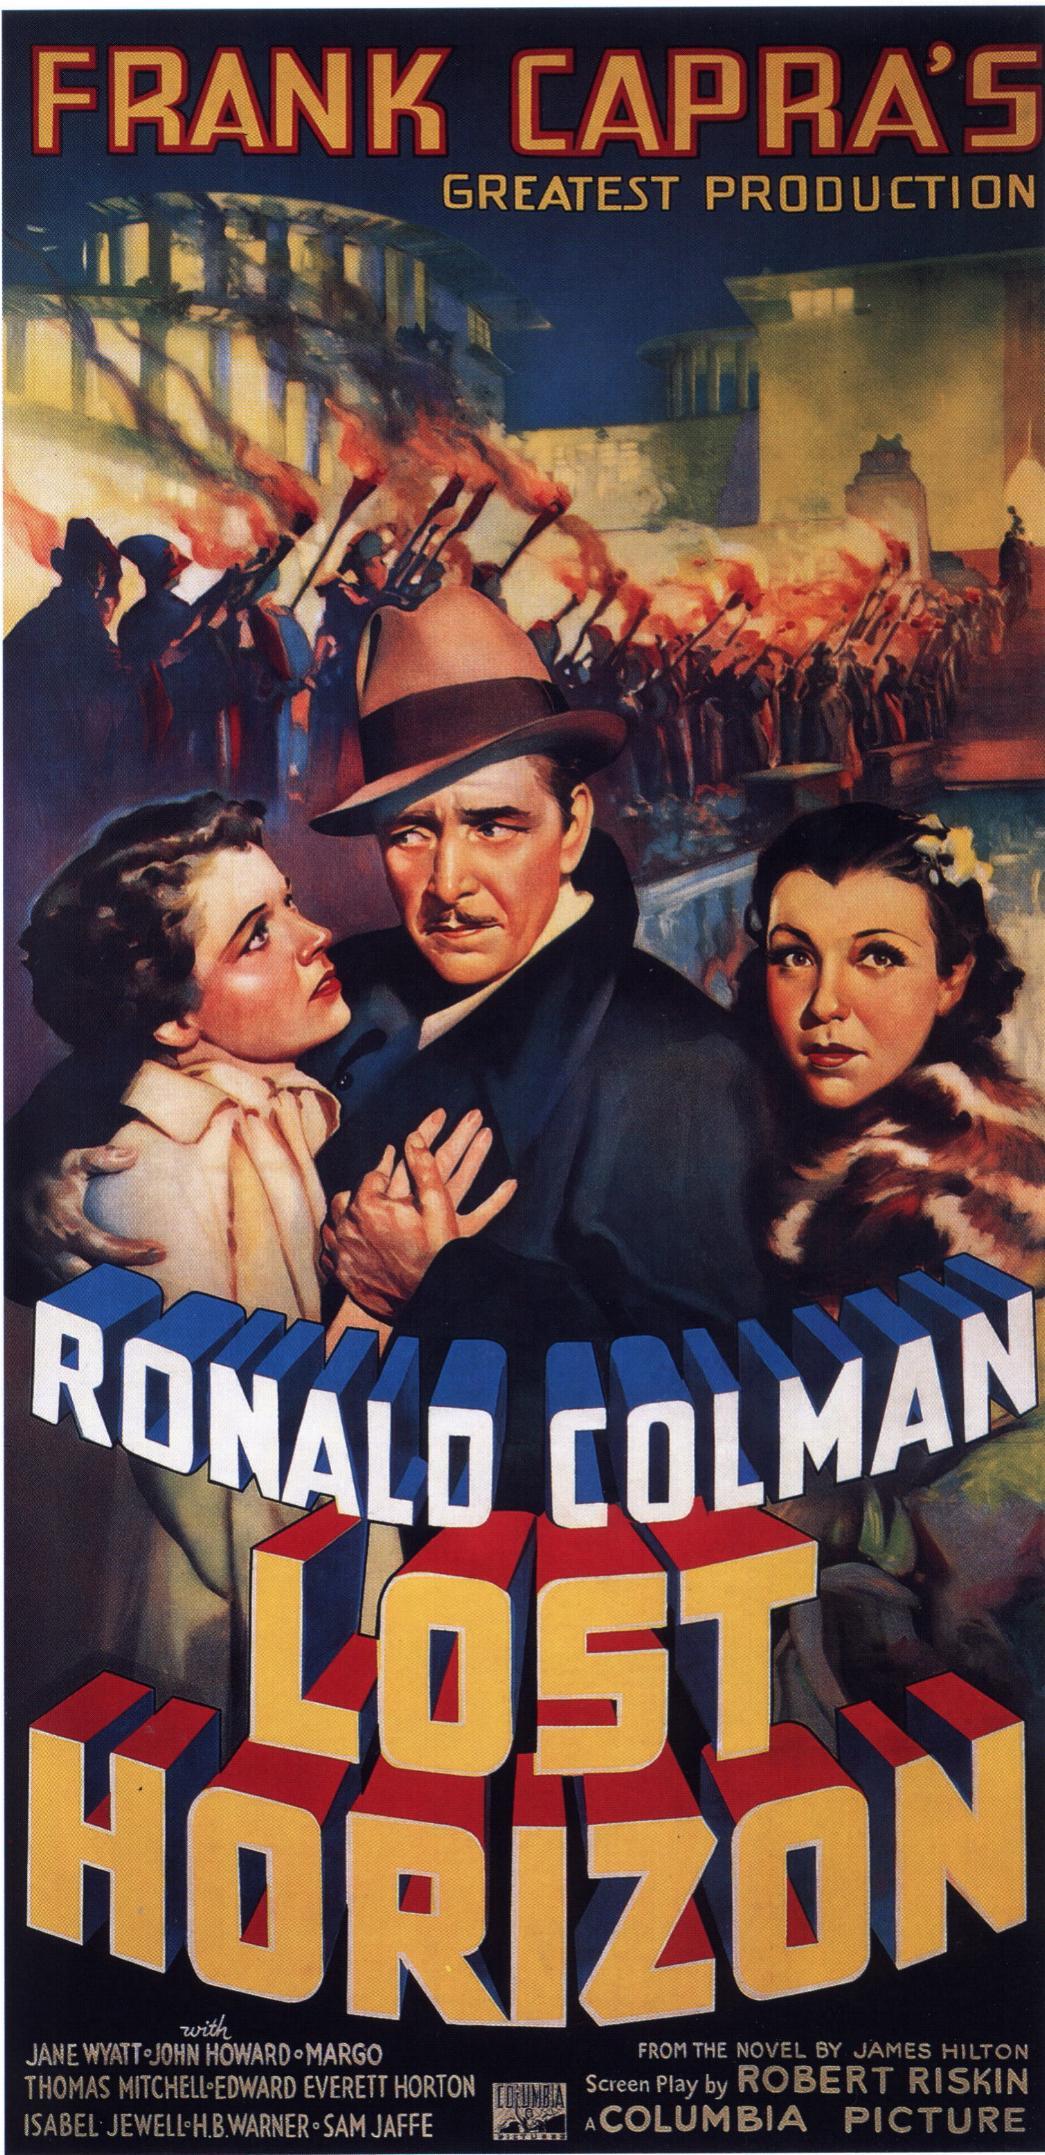 A theatrical release poster for the 1937 film "Lost Horizon." (Public Domain)